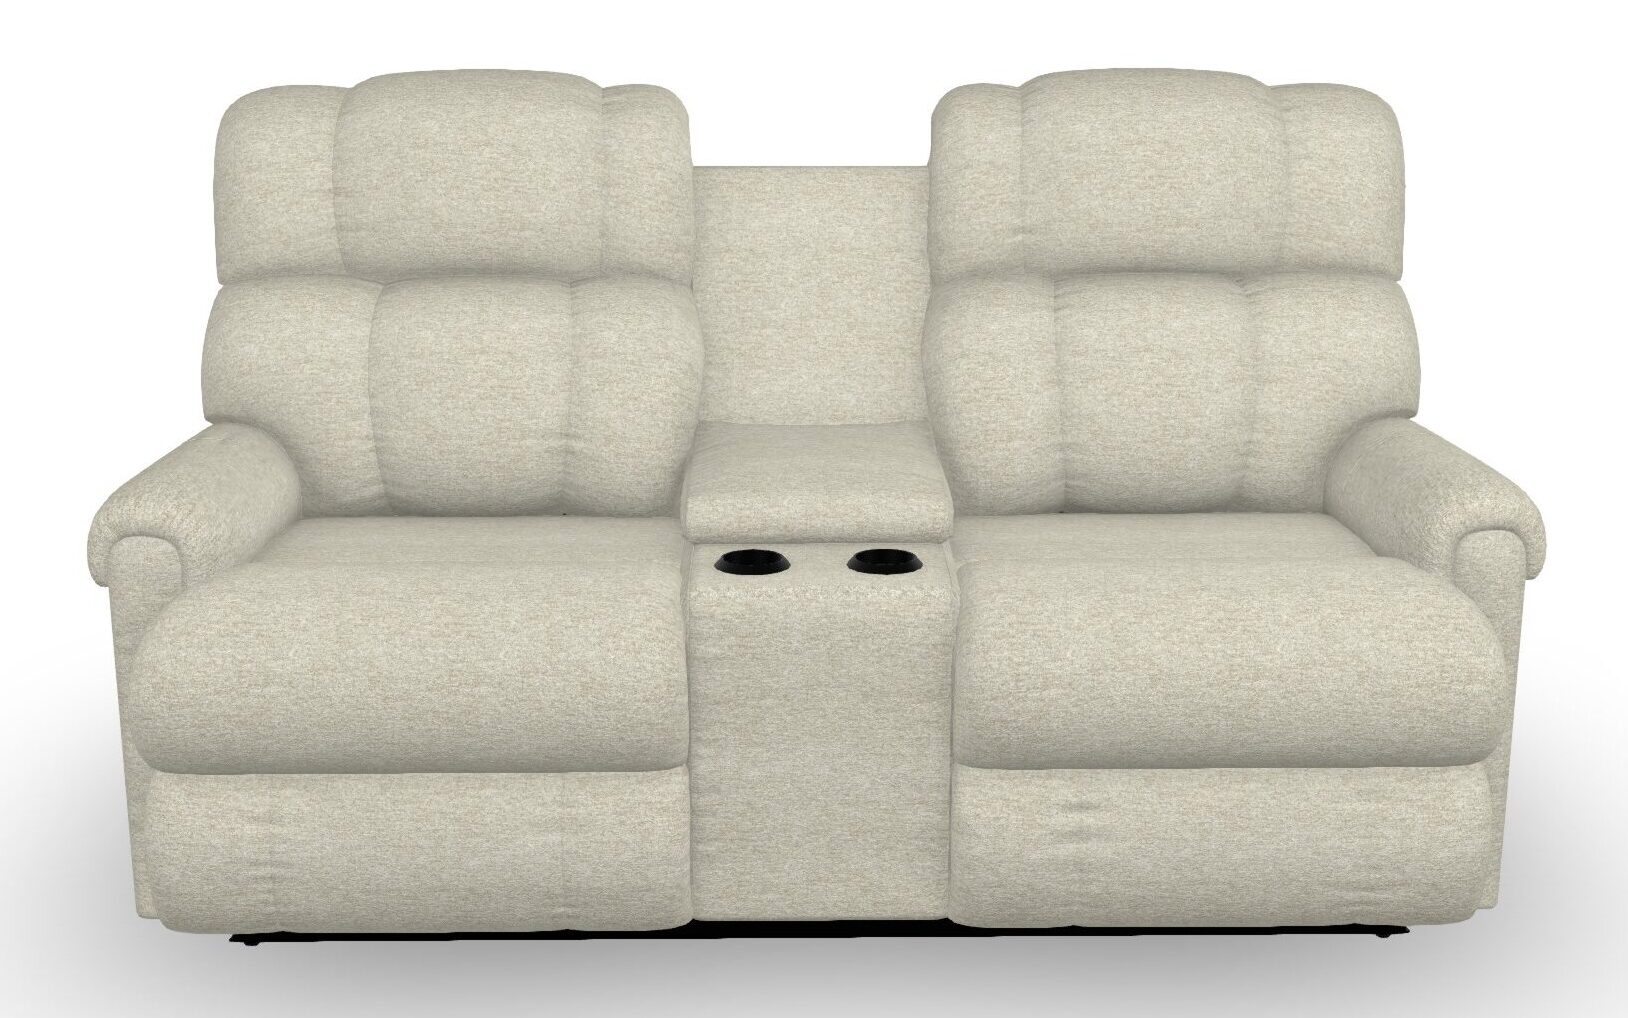 Rocker Recliner Loveseat – A Cozy Seating Solution插图4